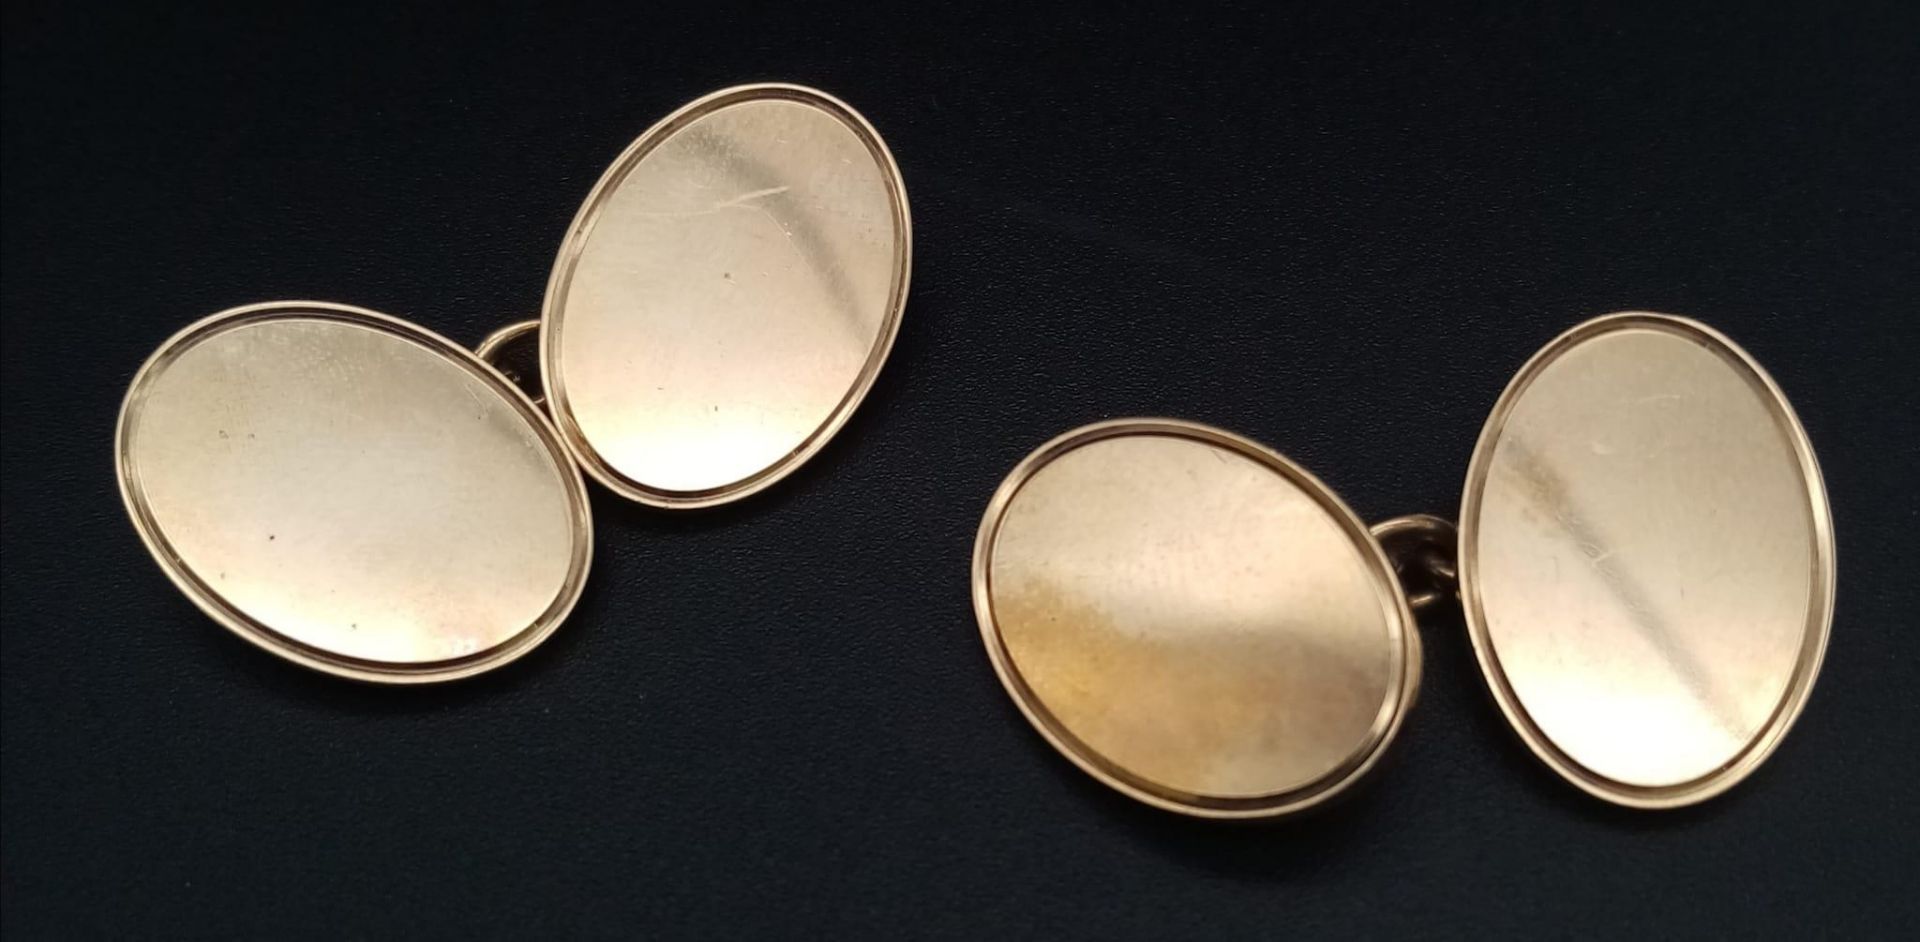 A Pair of Classic 9K Yellow Gold Oval Cufflinks. 15.42g total weight.